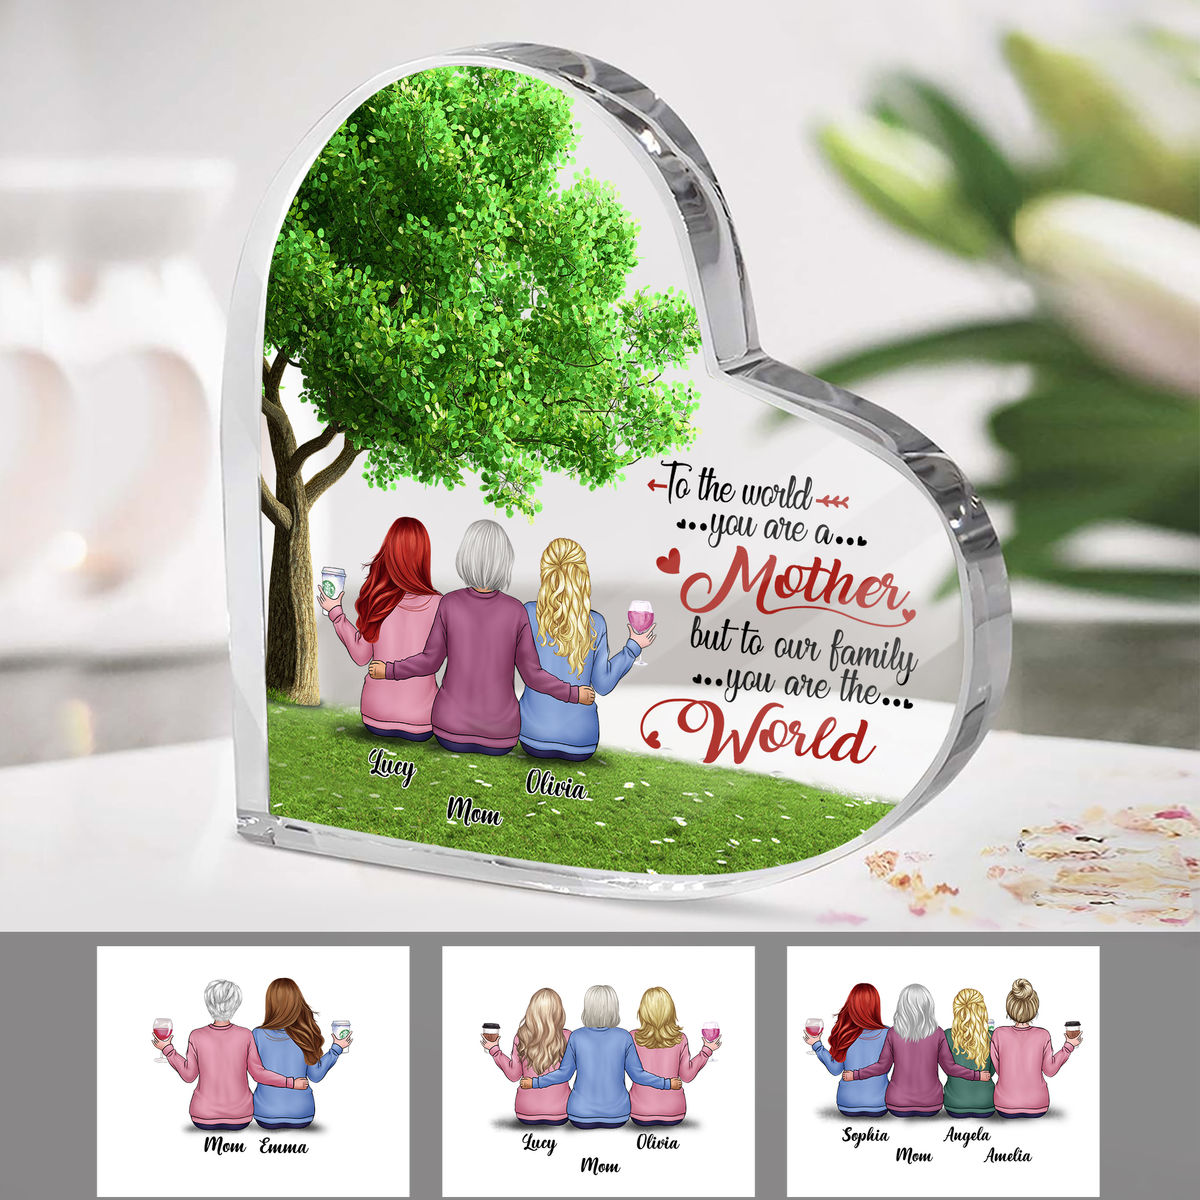 Personalized Desktop - Semitest - Transparent Plaque - To the world you are a mother but to our family you are the world (Custom Heart - Shaped Acrylic Plaque)